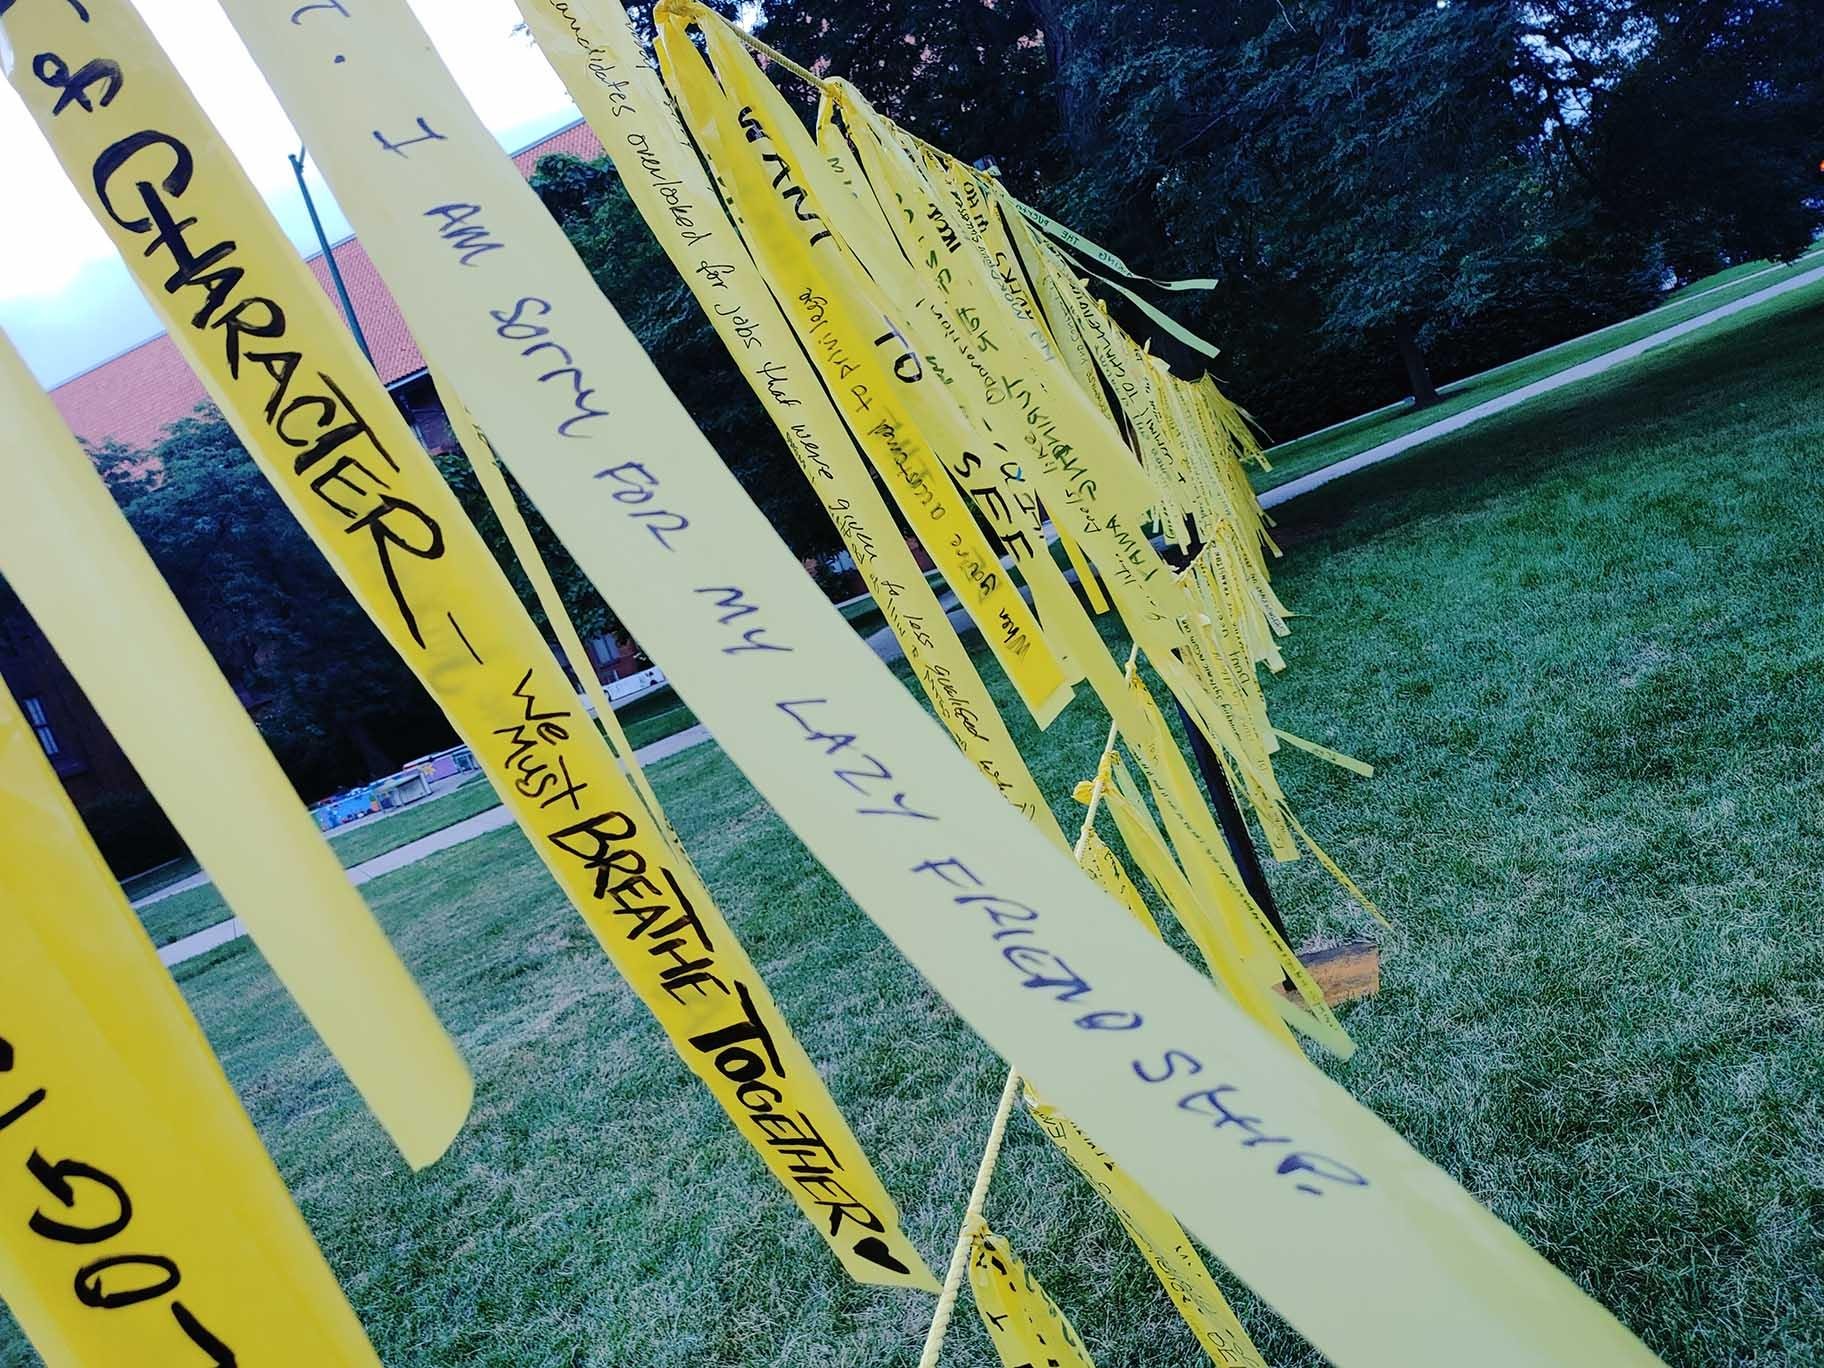 The installation “Dirty Laundry” on the lawn at Schurz High School. (Erica Gunderson / WTTW News)